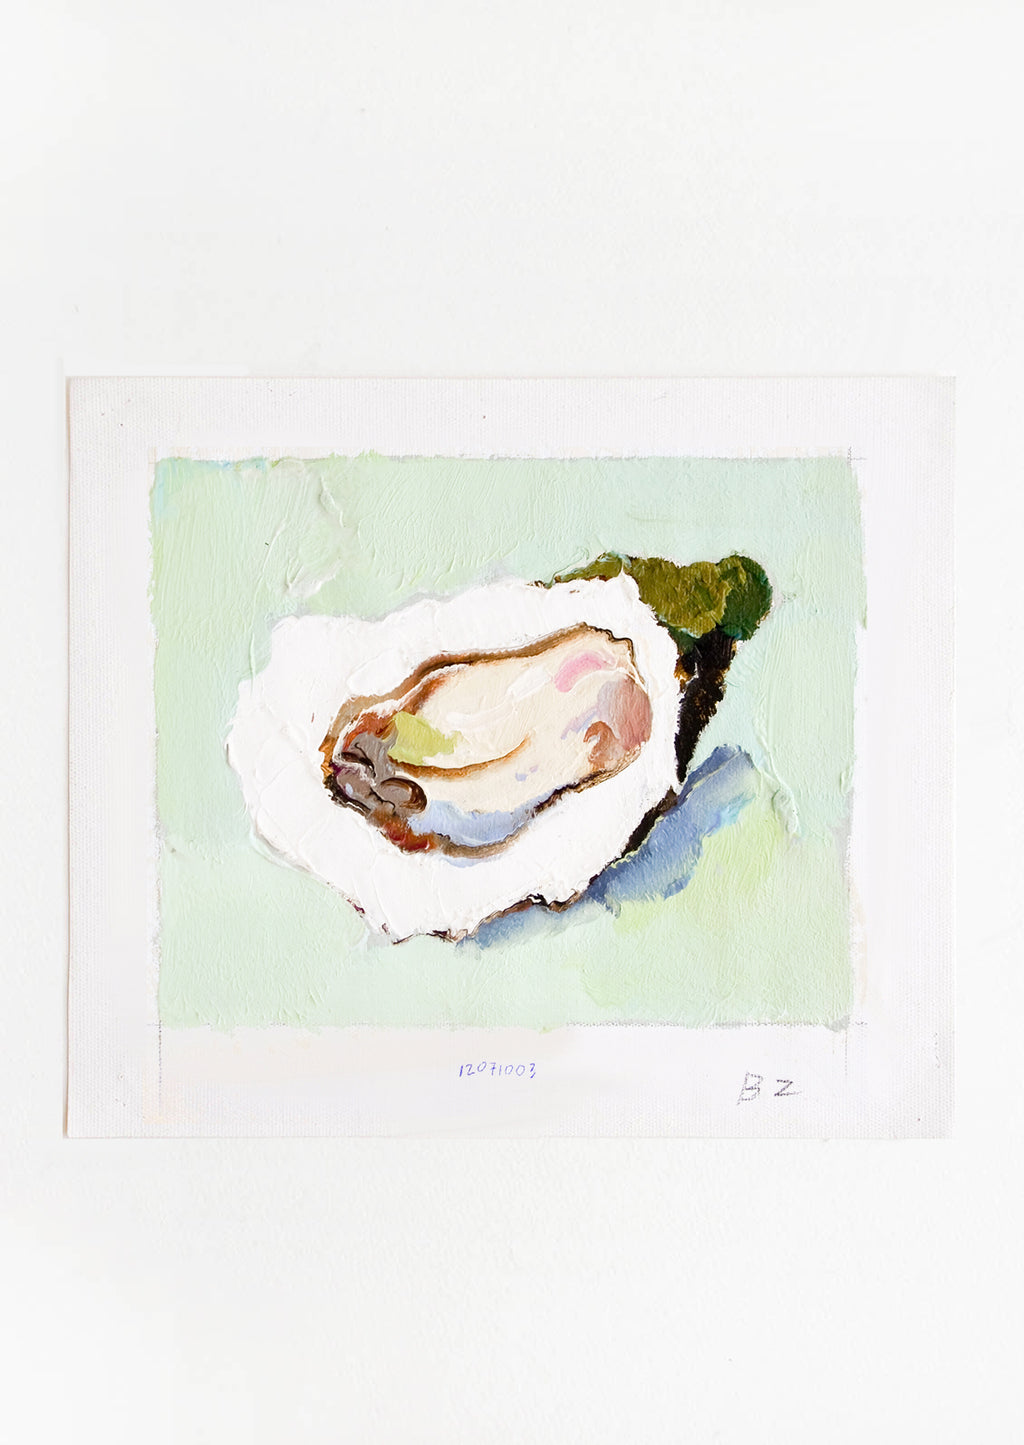 1: Original oil painting with still life image of a single oyster on a mint green background.